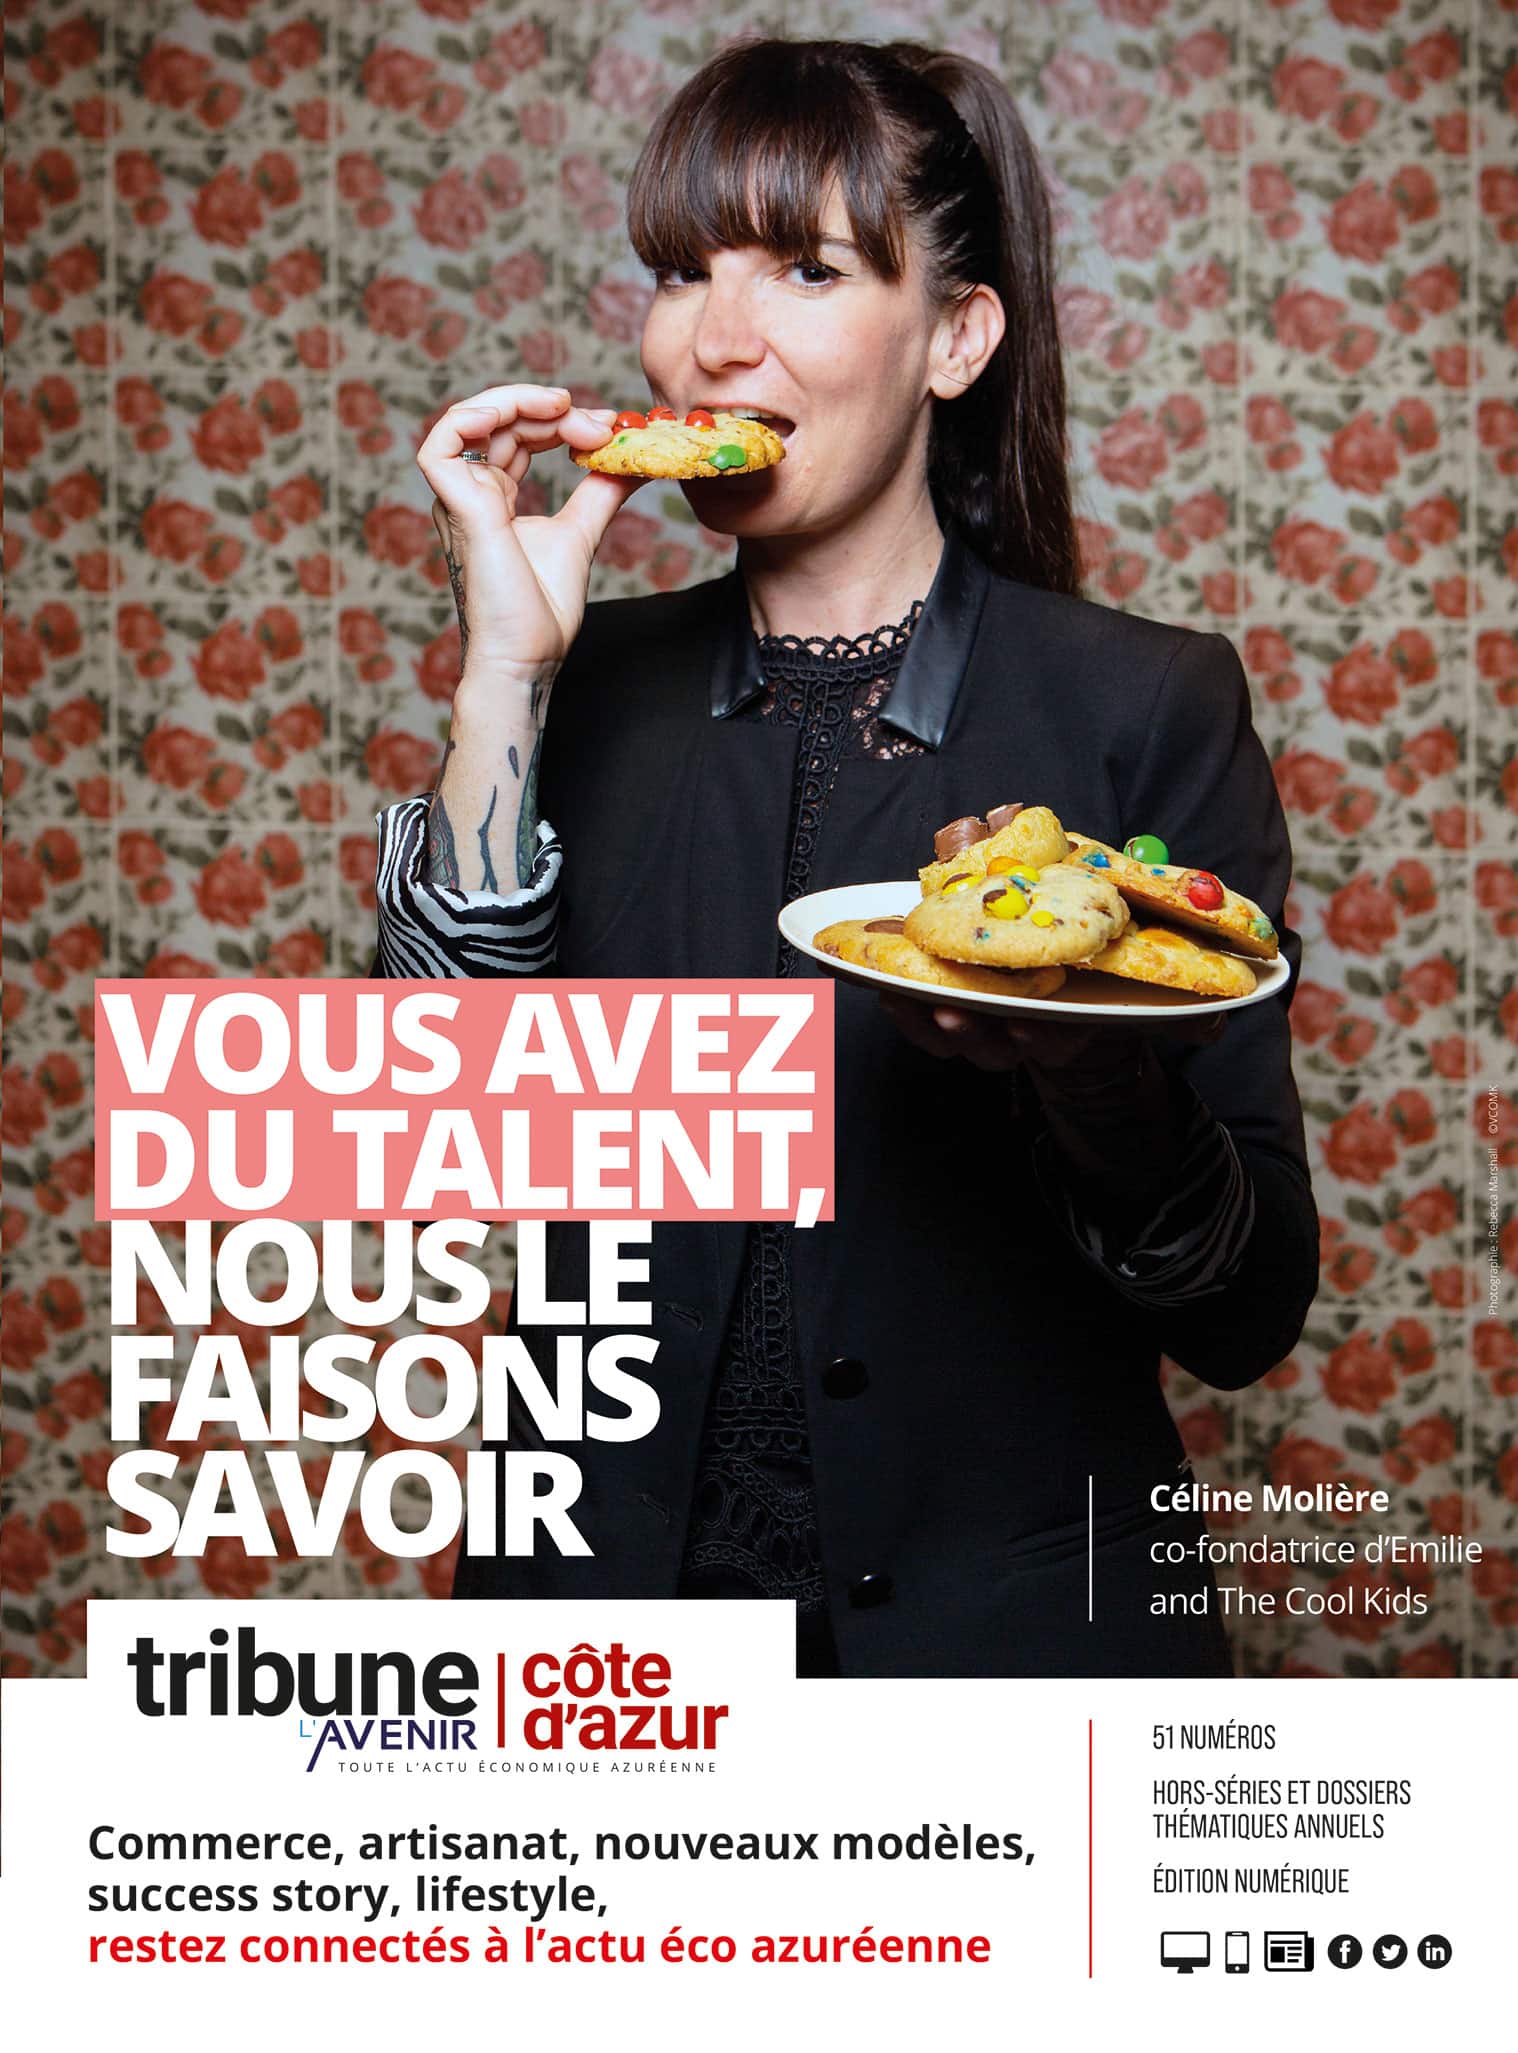 Advertising poster showing a portrait of woman holding a plate full of cookies and eating one overlain with text (in French)